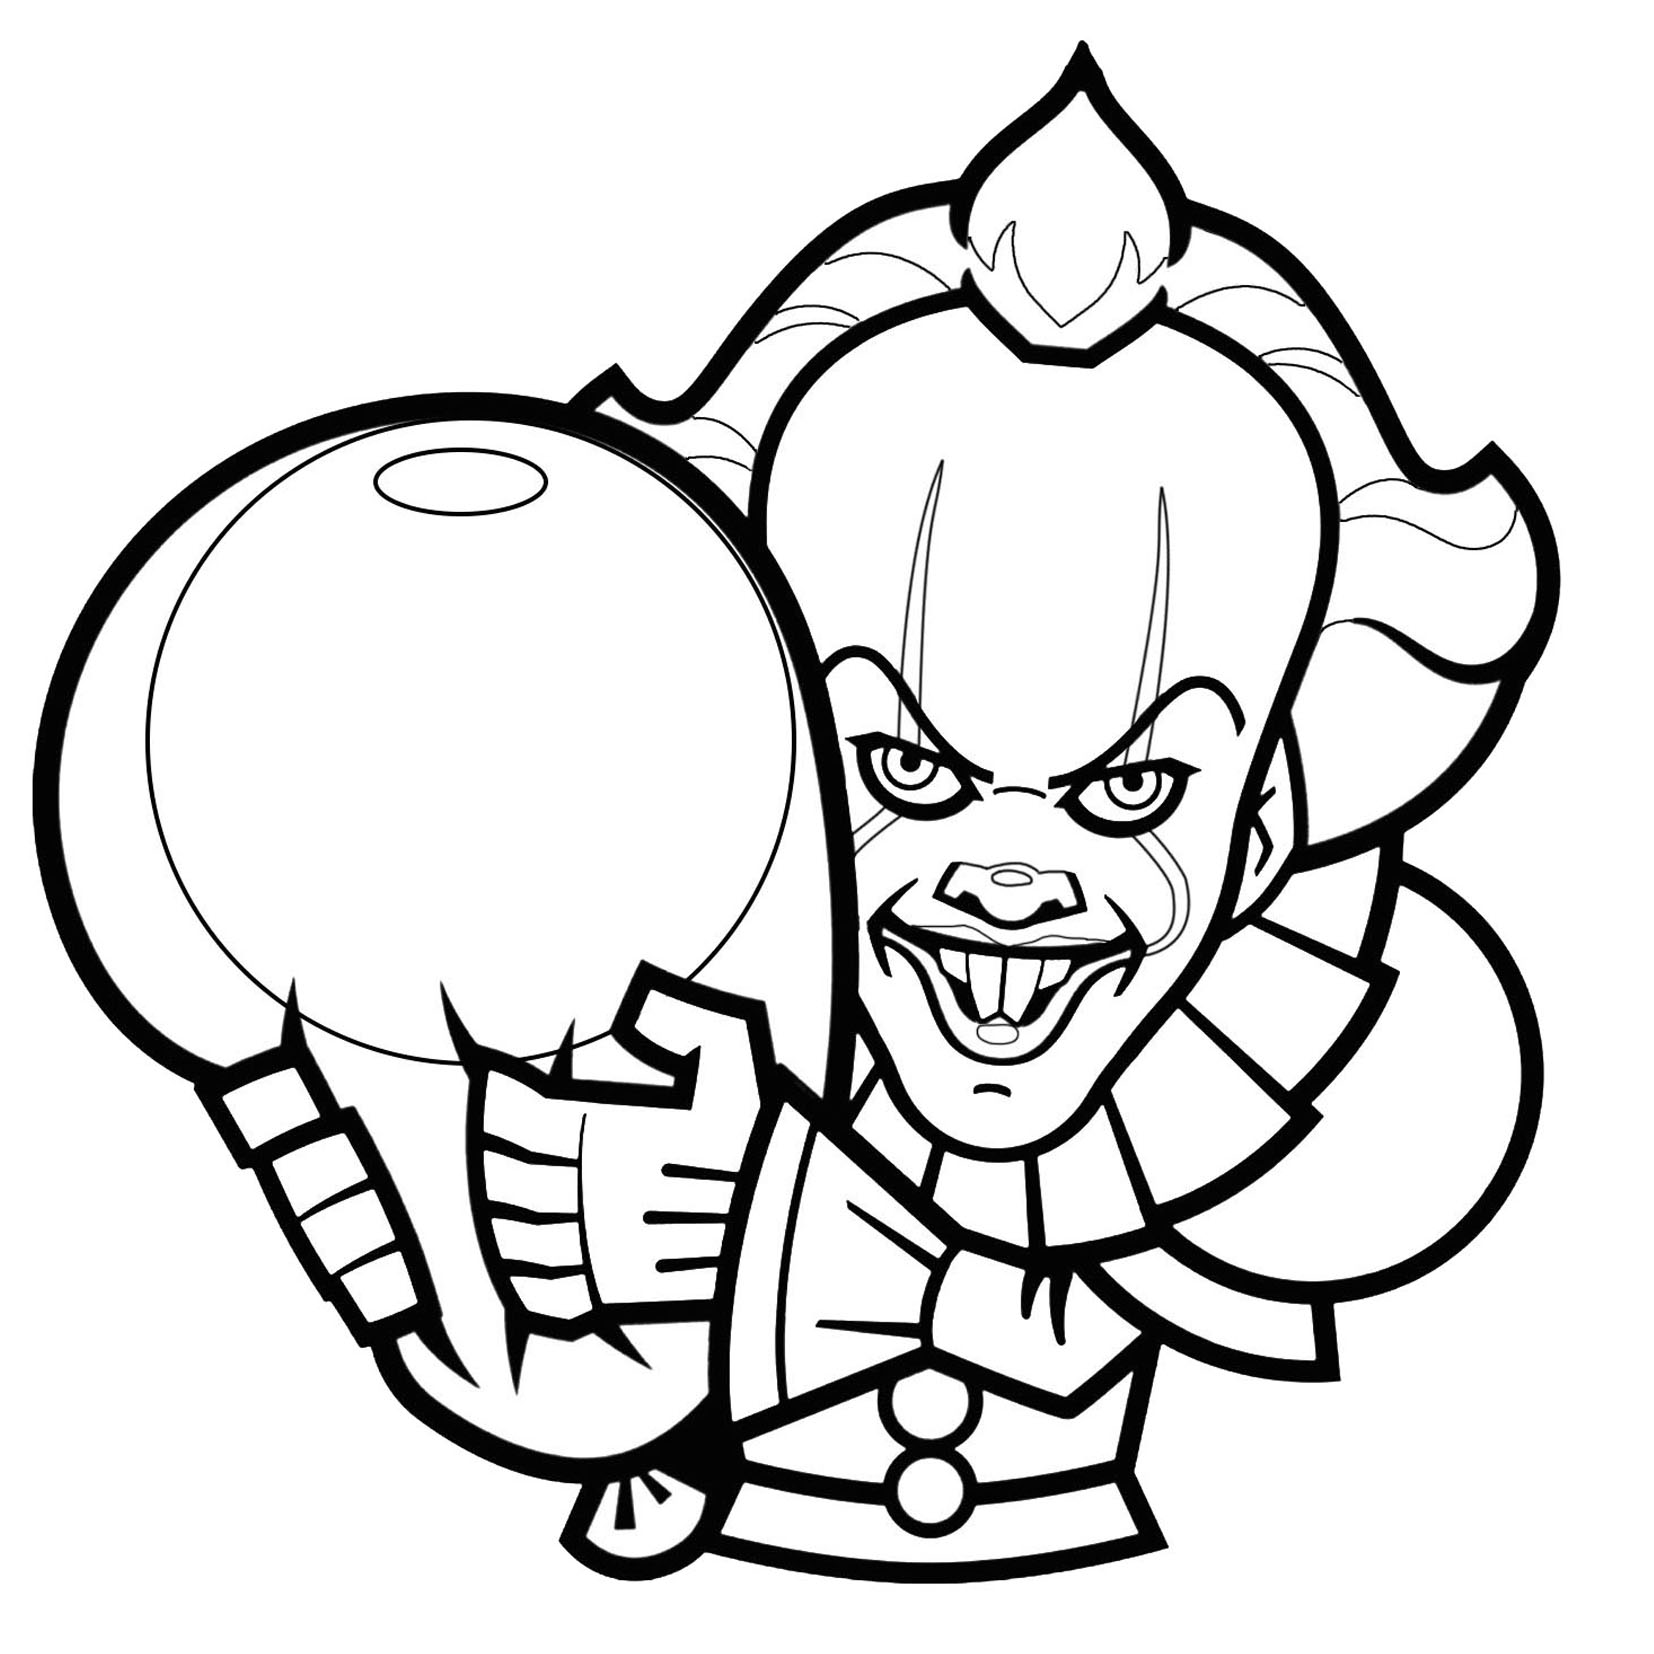 clown-of-it-version-2-halloween-kids-coloring-pages